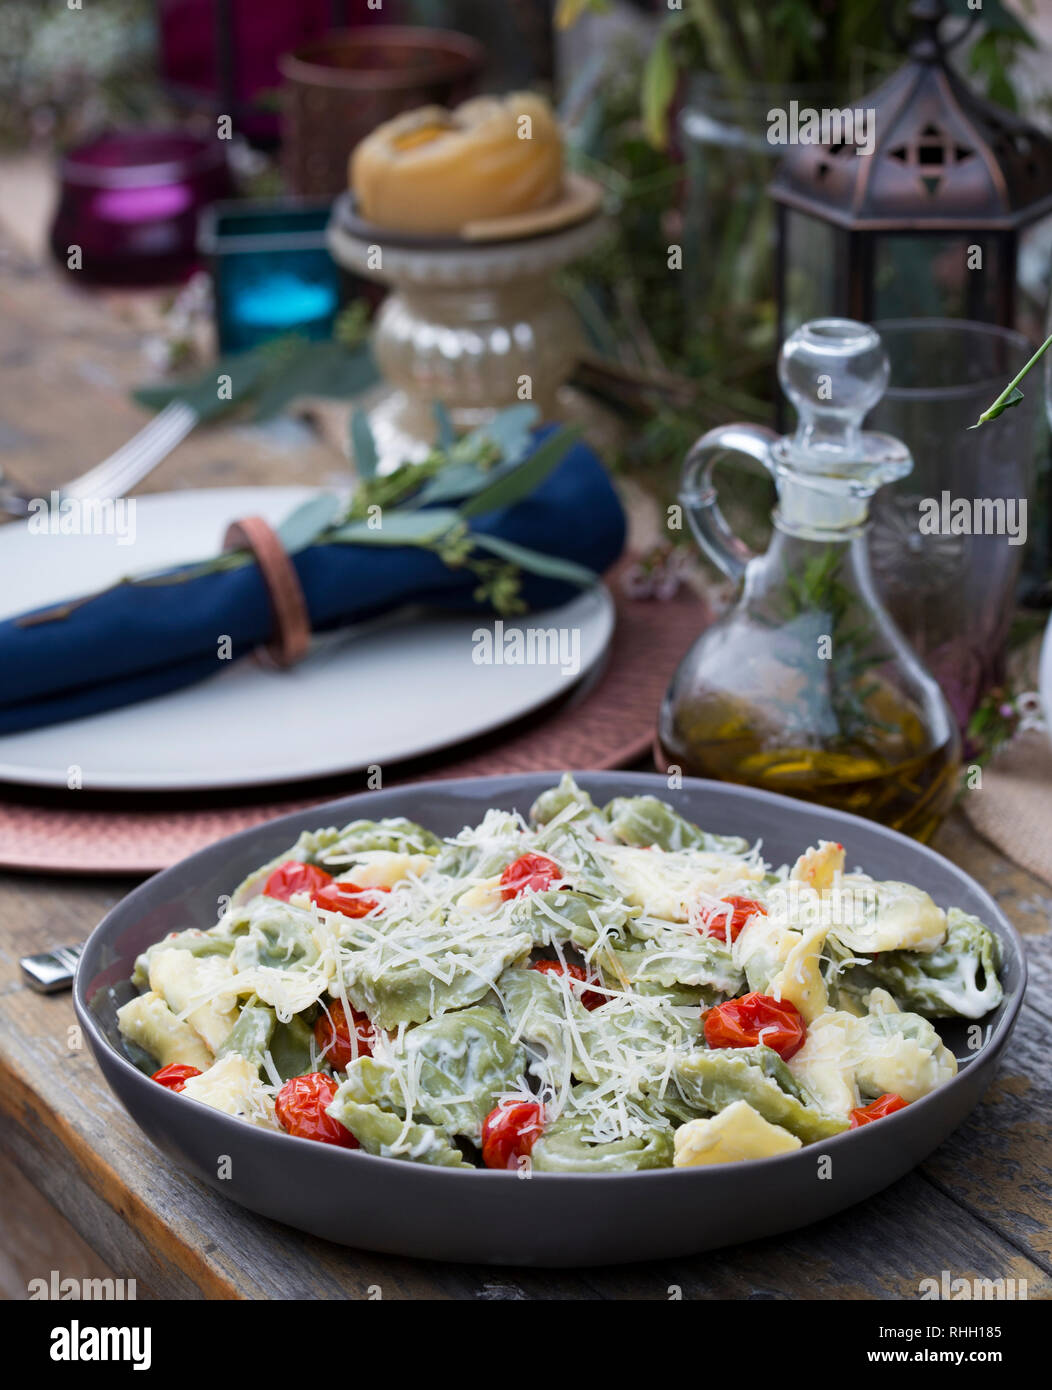 Serving bowl of green and yellow ravioli with tomatoes and shredded parmesan cheese on wooden table for backyard outdoor dinner party, with olive oil. Stock Photo